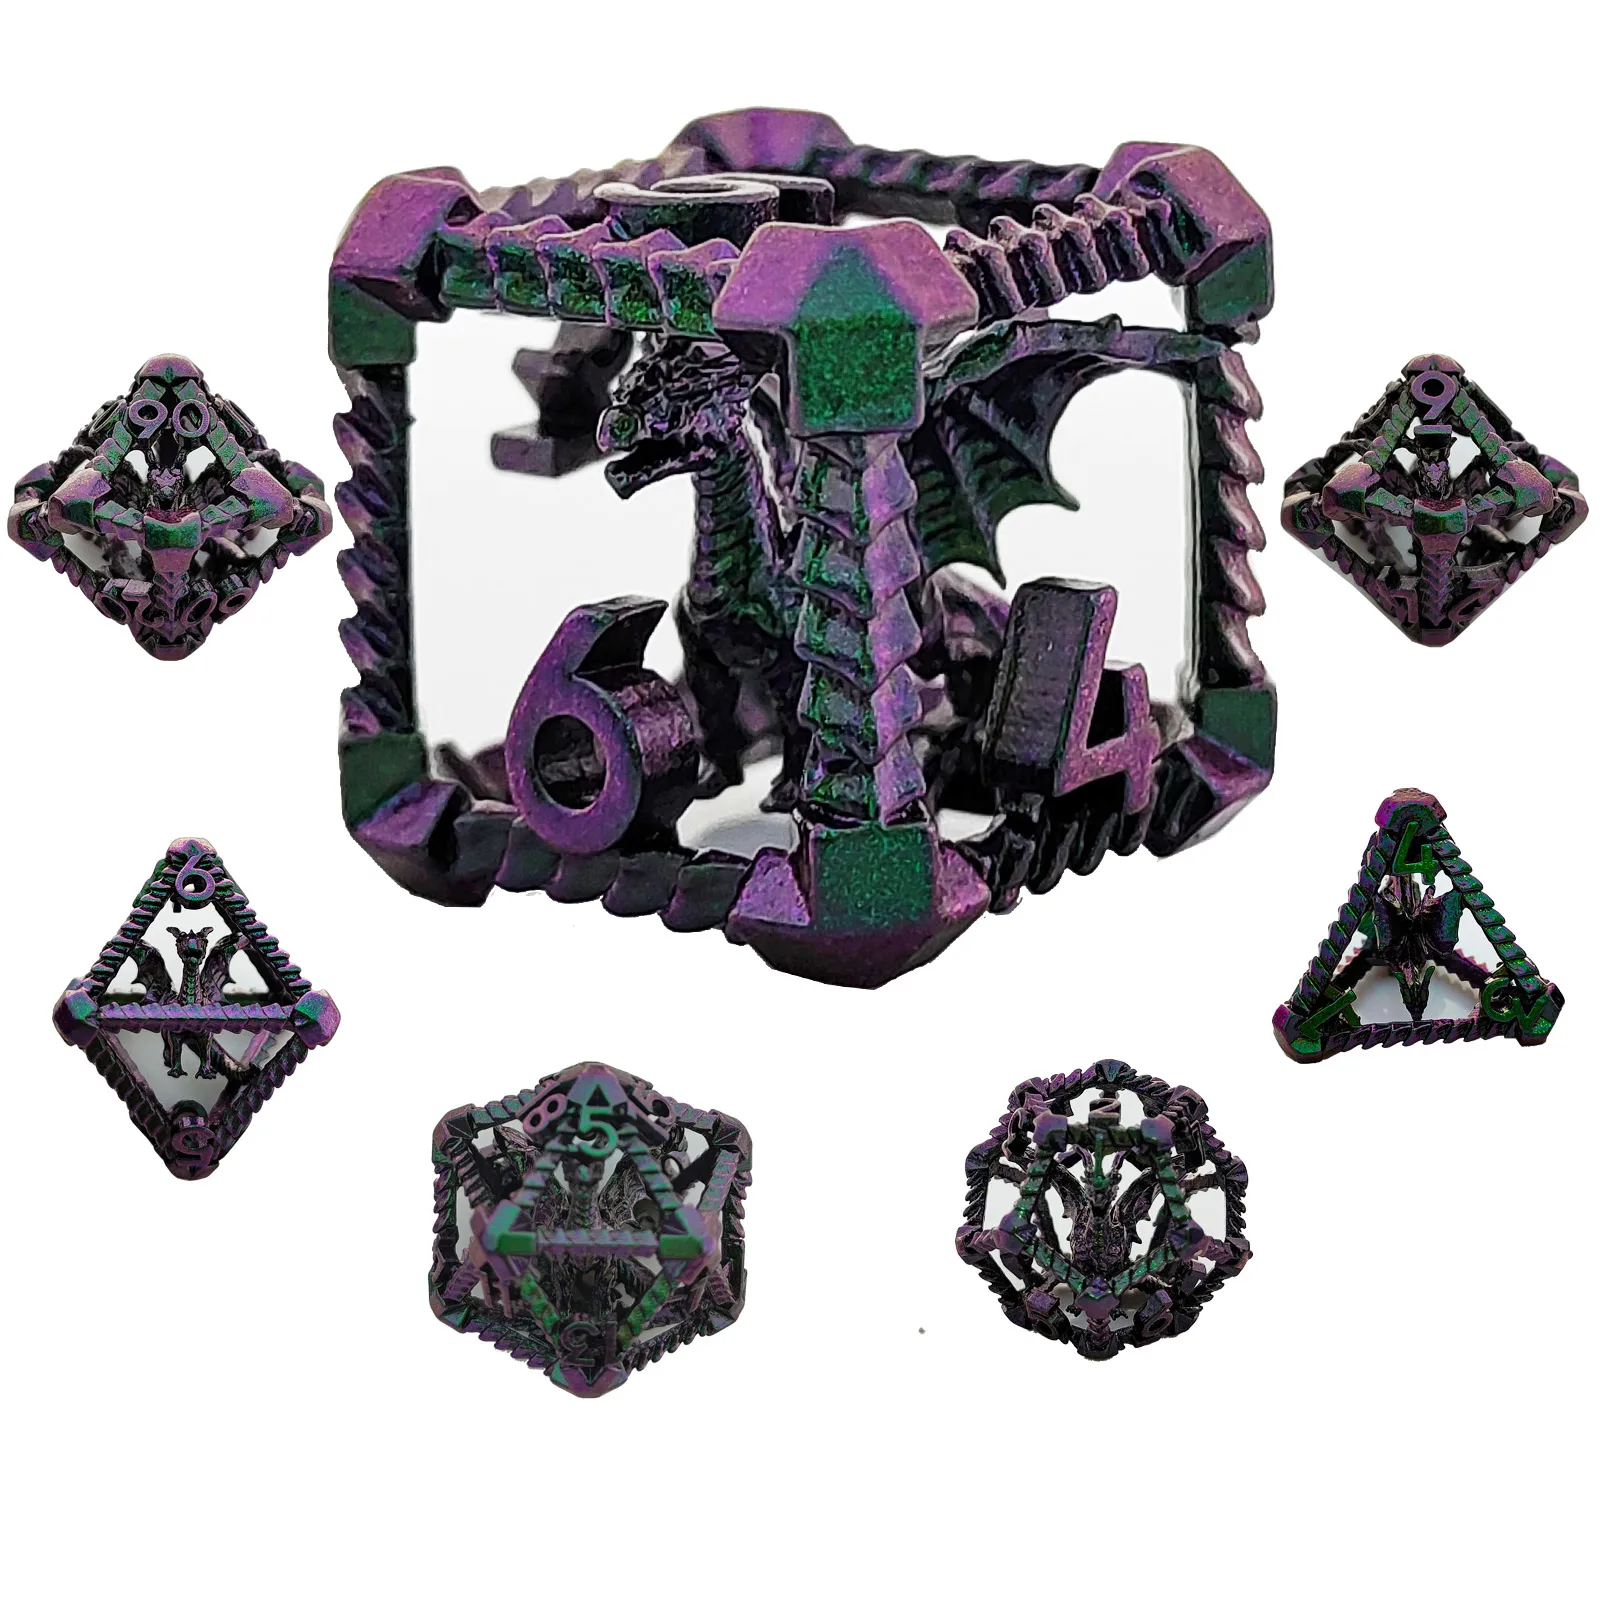 DND Hollow Metal Giant Polyhedral Dragon Dice 7-Piece Set for Roleplaying Tabletop Games Halloween Party Accessories Christmas G dnd dice set roleplaying game polyhedral dice set d